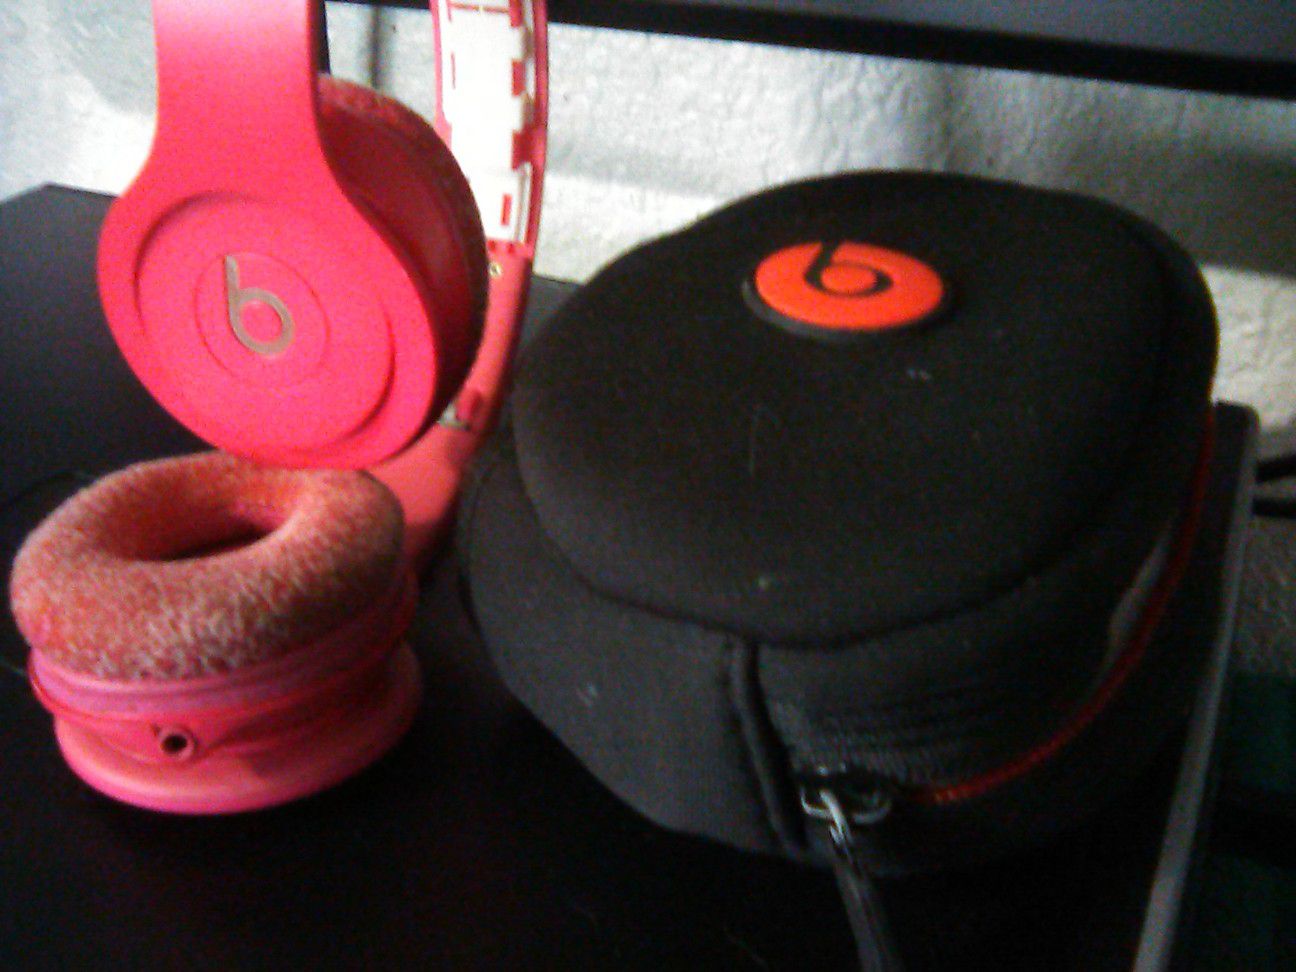 Beats by Dr. Dre pink headphones and case